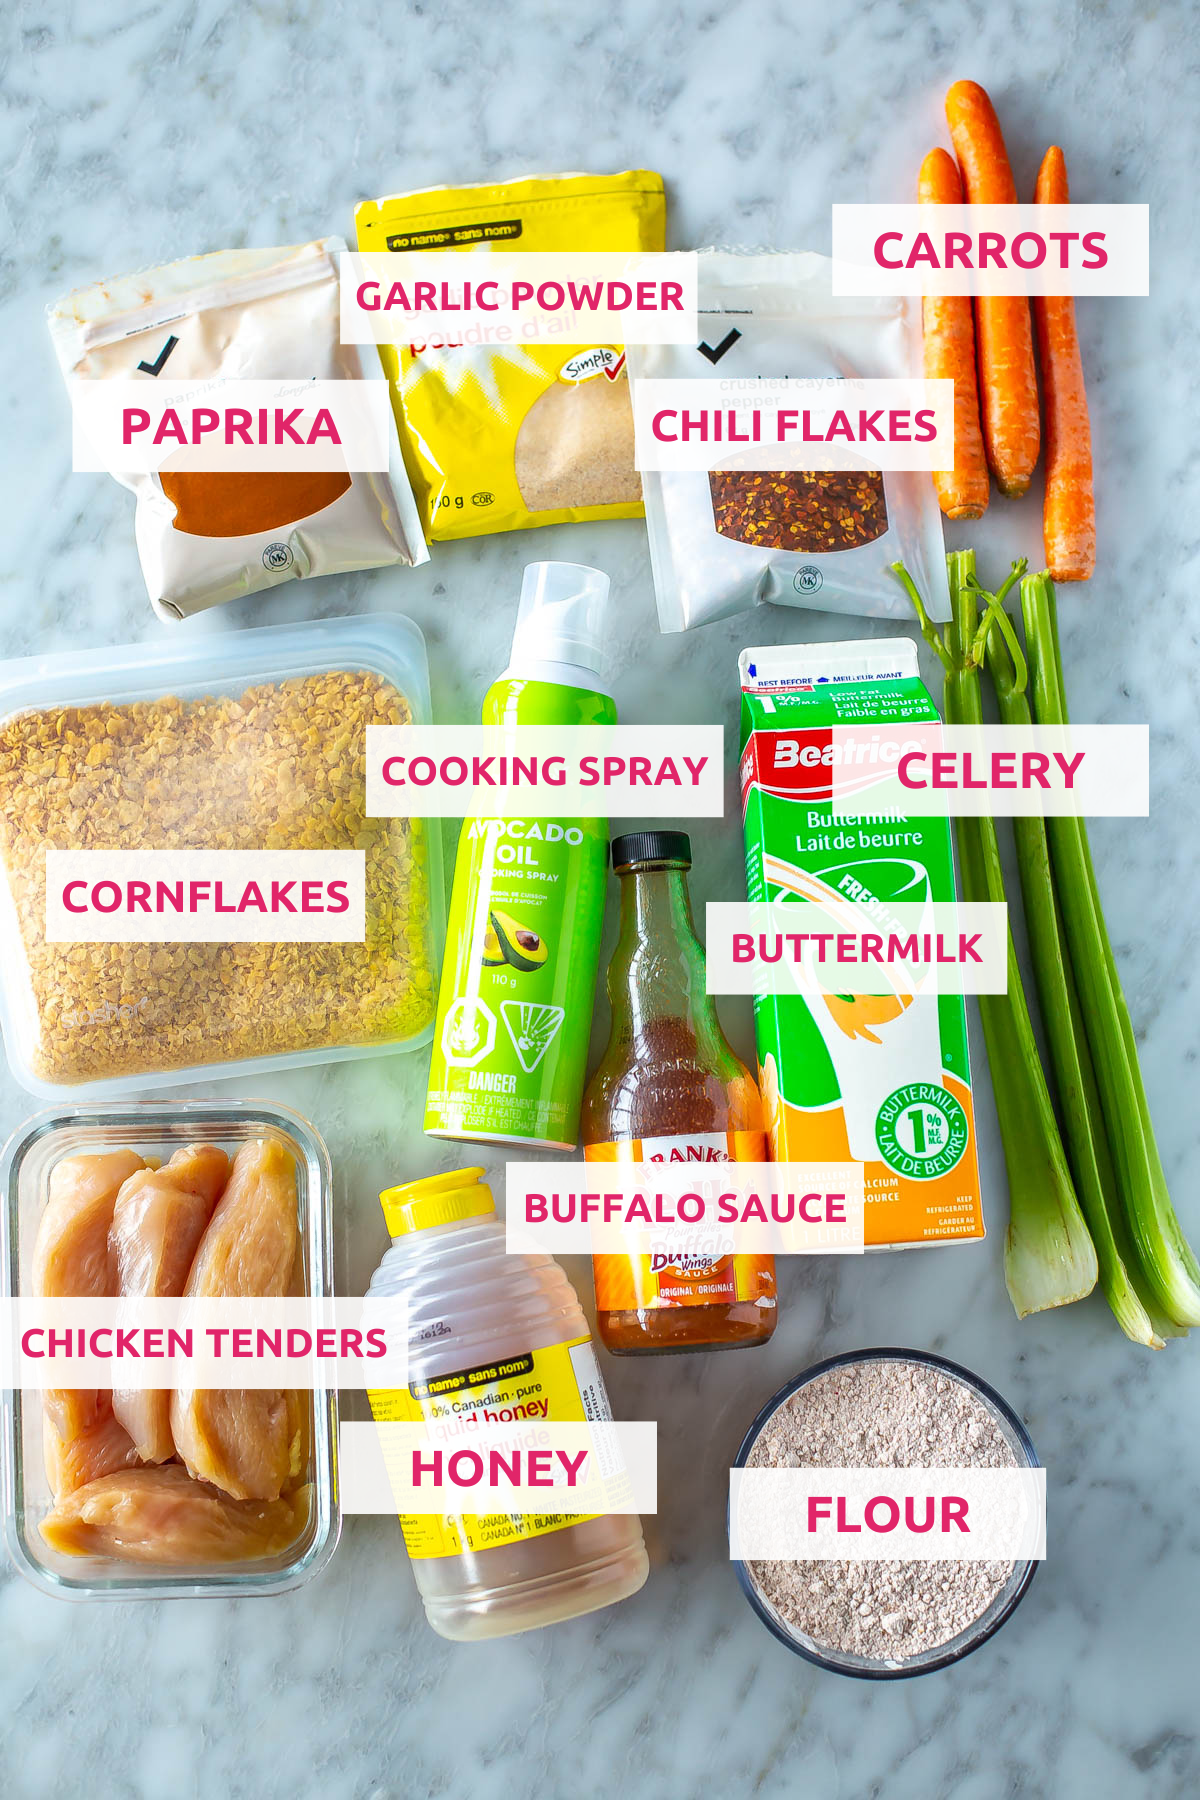 Ingredients for air fryer chicken tenders: chicken tenders, cornflakes, flour, buttermilk, cooking spray, paprika, garlic powder, chili flakes, carrots, celery, honey and buffalo sauce.